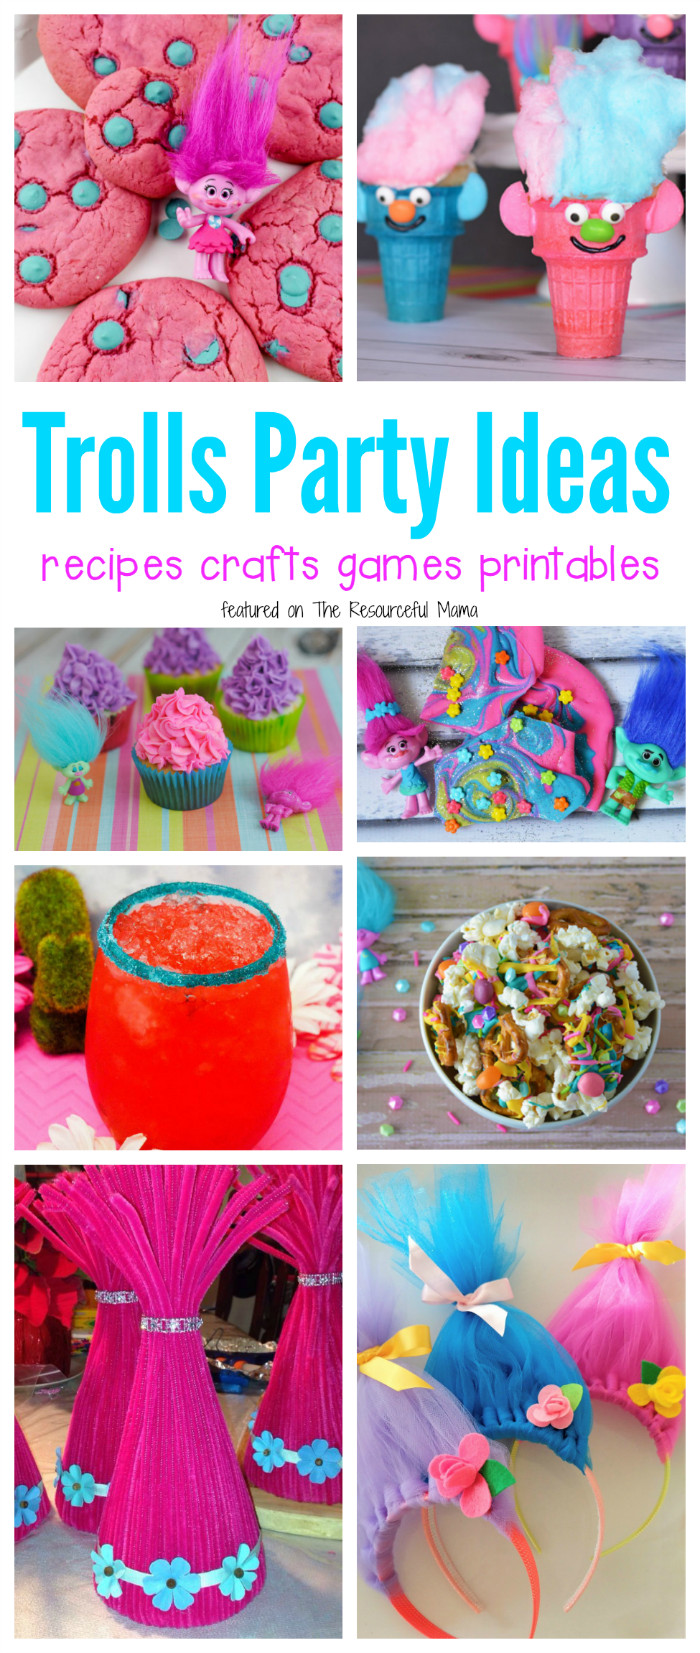 Trolls Party Ideas For Girl
 Pin on The Resourceful Mama